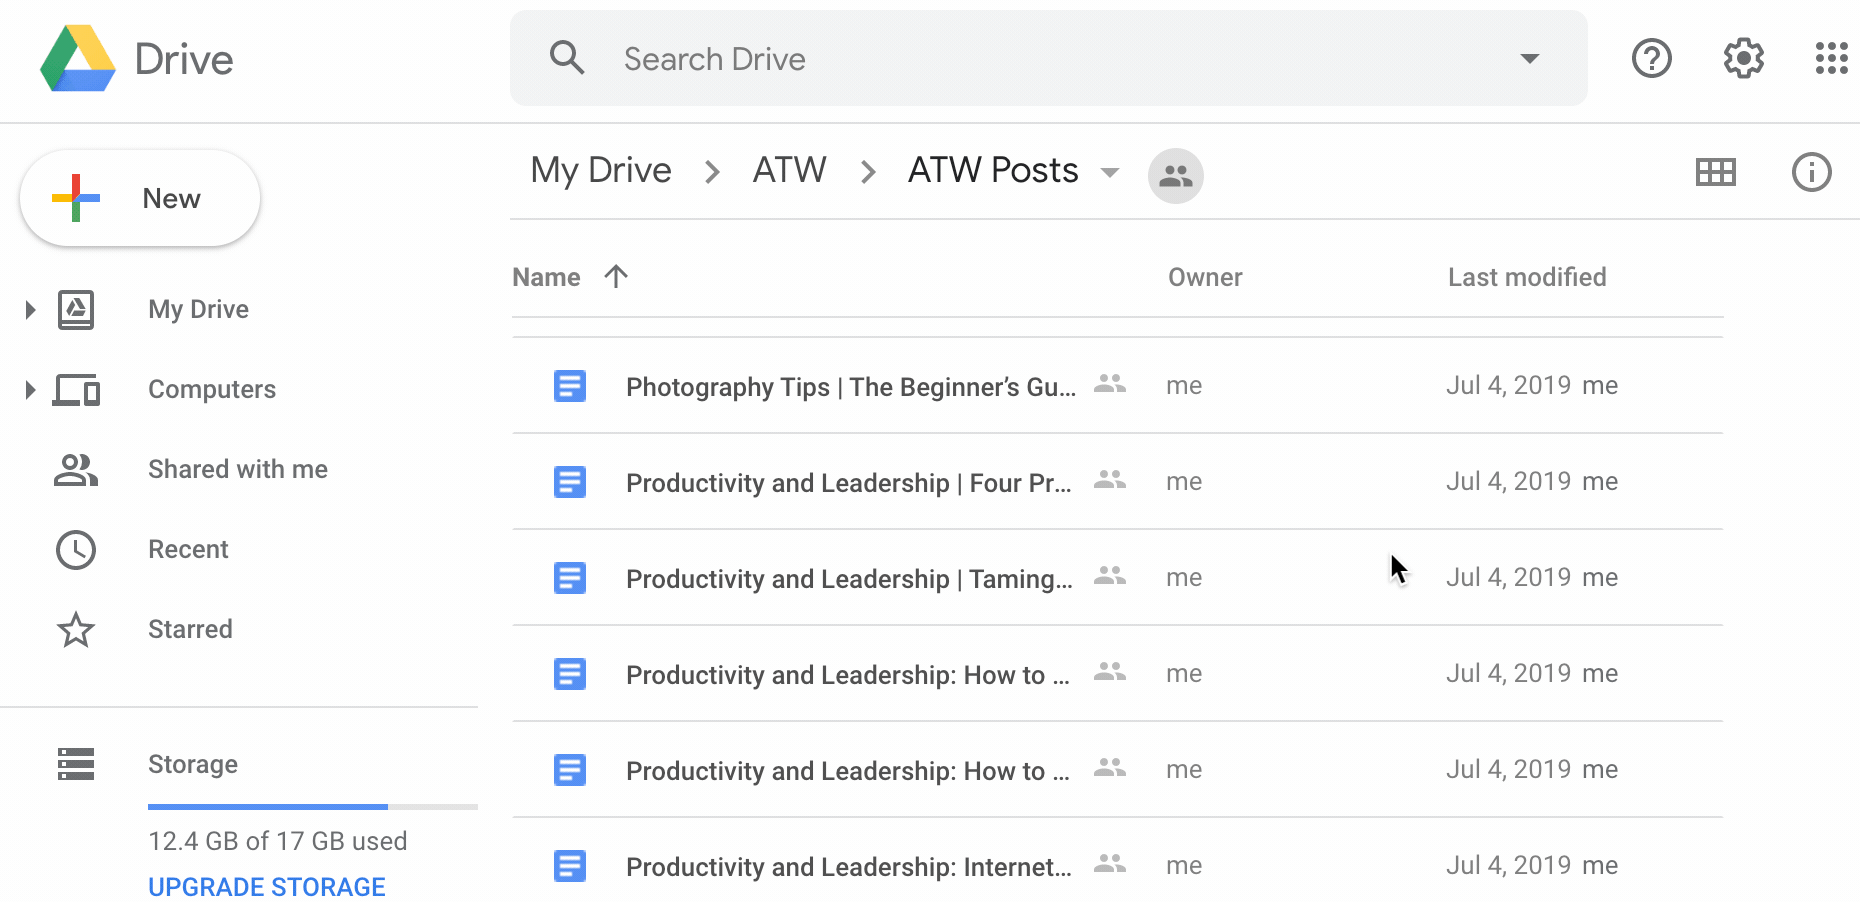 Check out this neverending list of pending blog posts in my Google Drive. Oy.